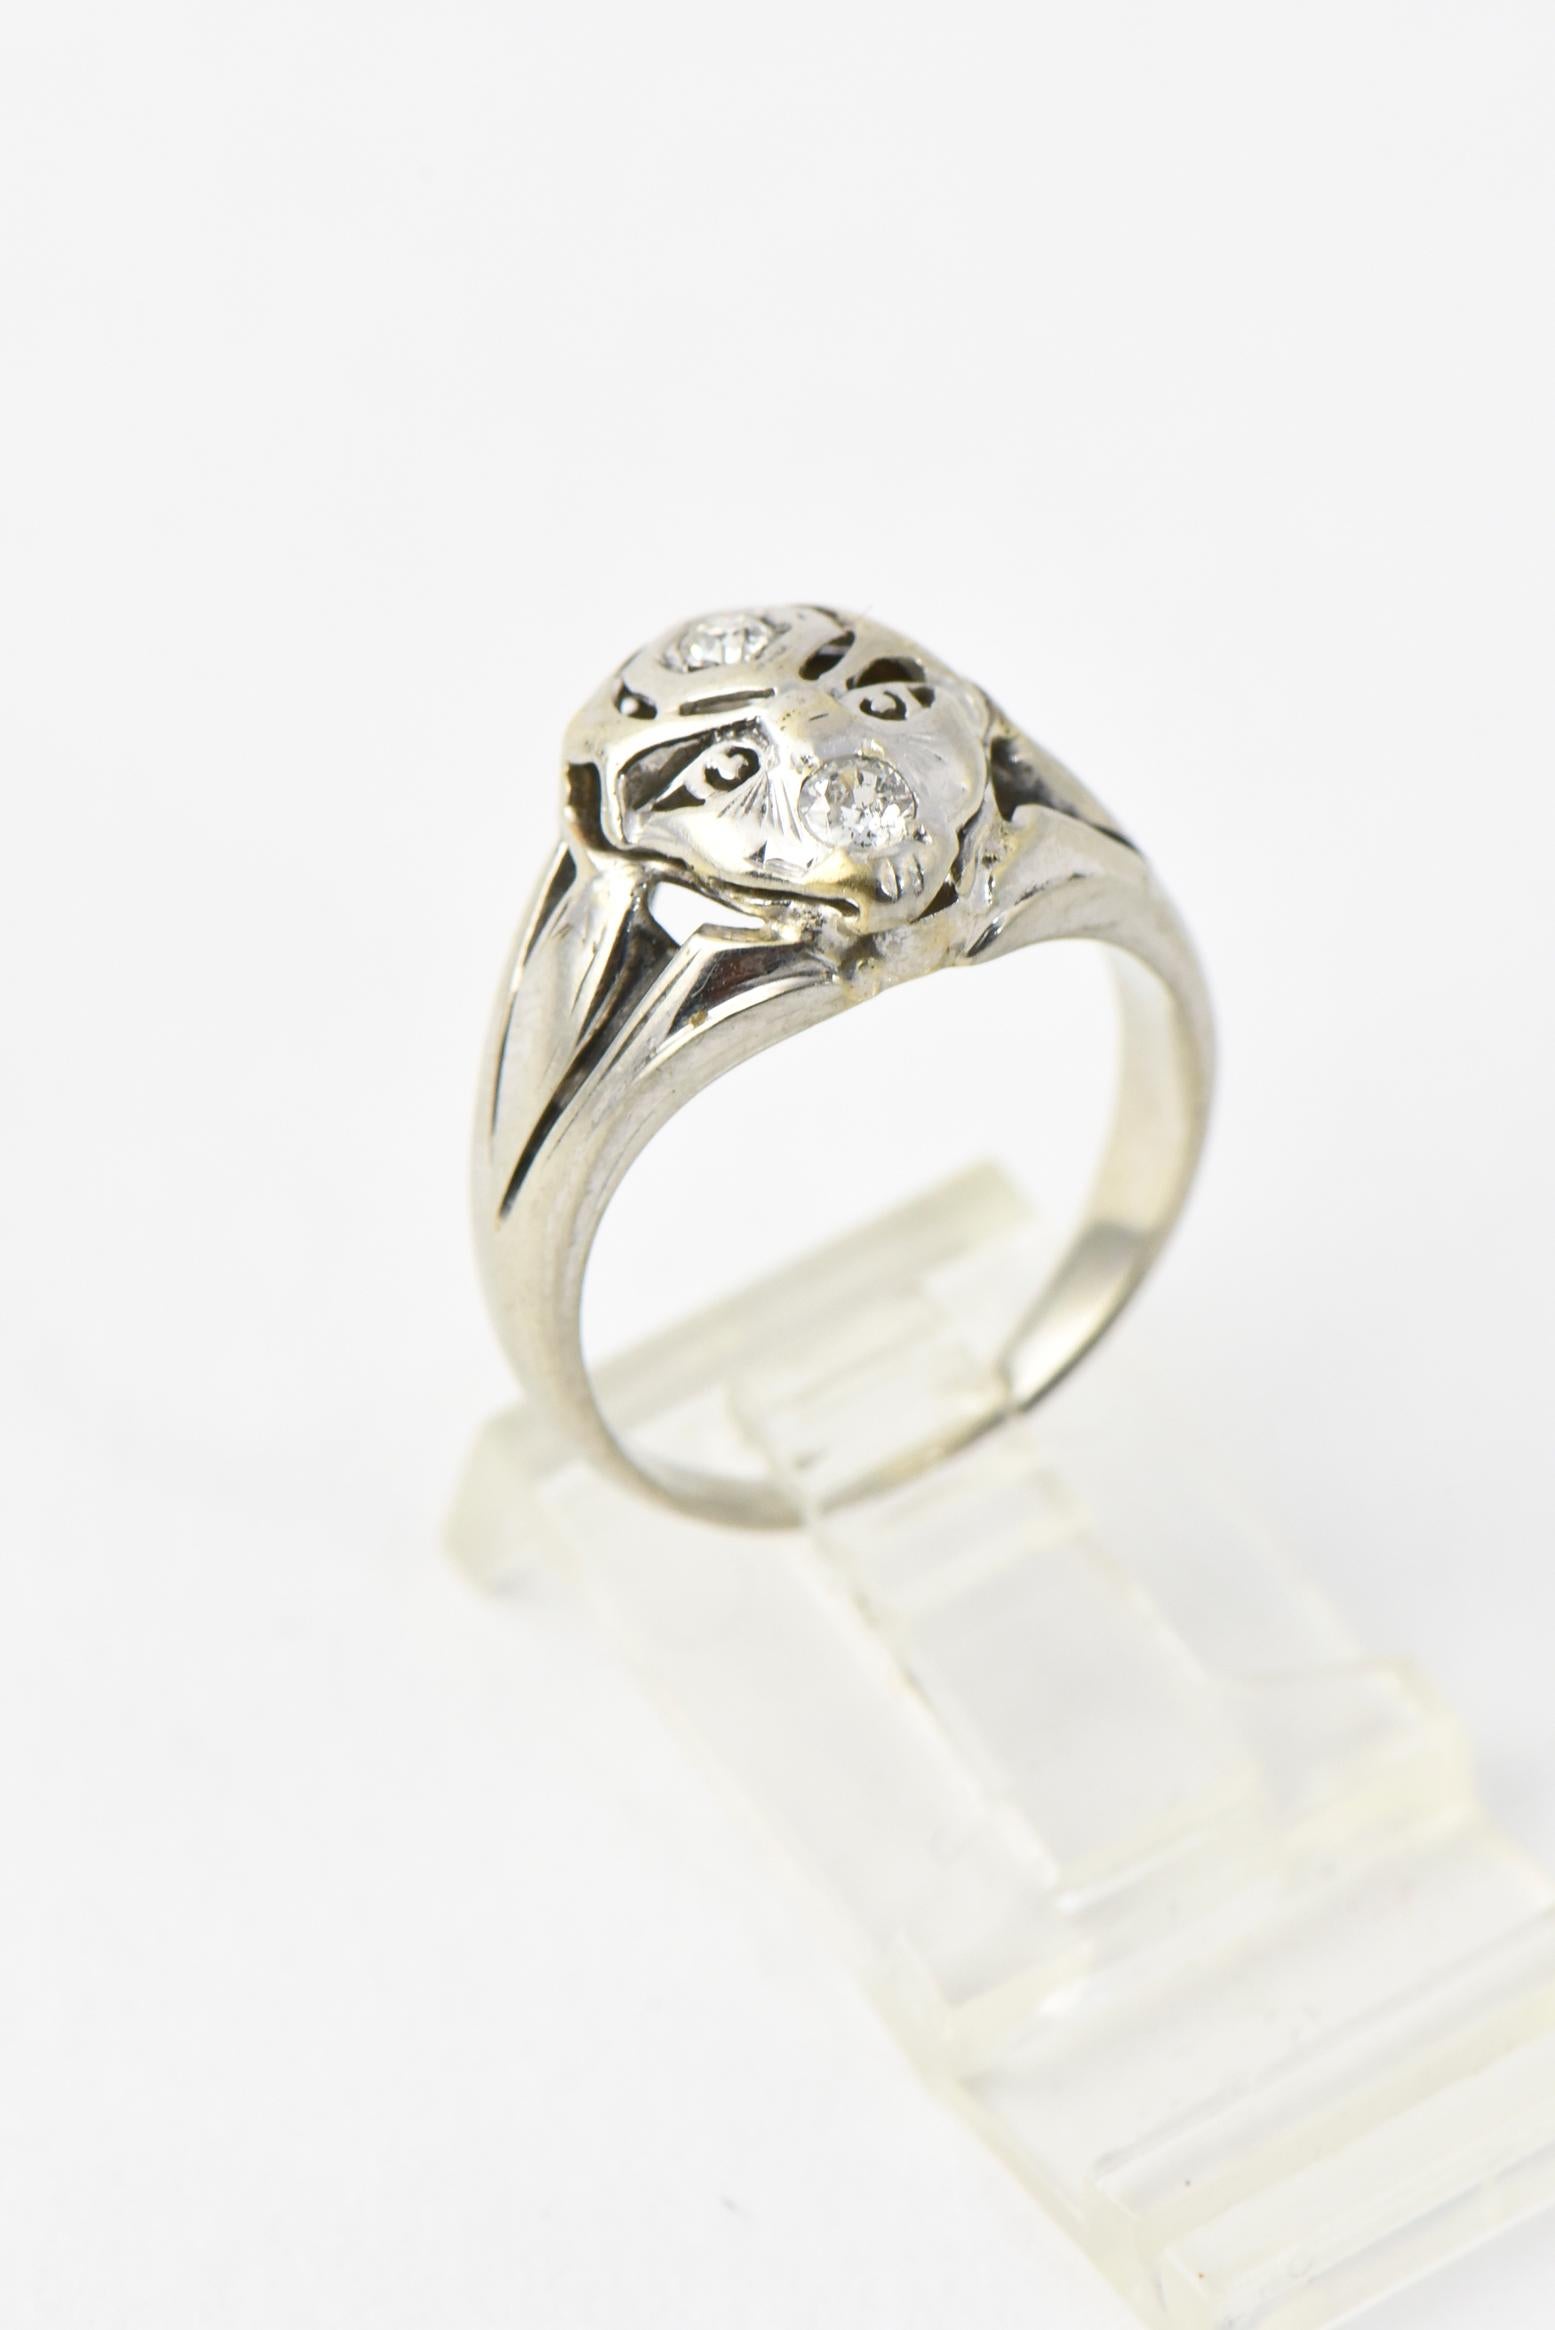 Mid 20th century 14K white gold ring featuring an abstract face with a diamond set on the forehead and mouth. Diamonds total approximately .14 carats. US size 7; can be sized. Age wear.